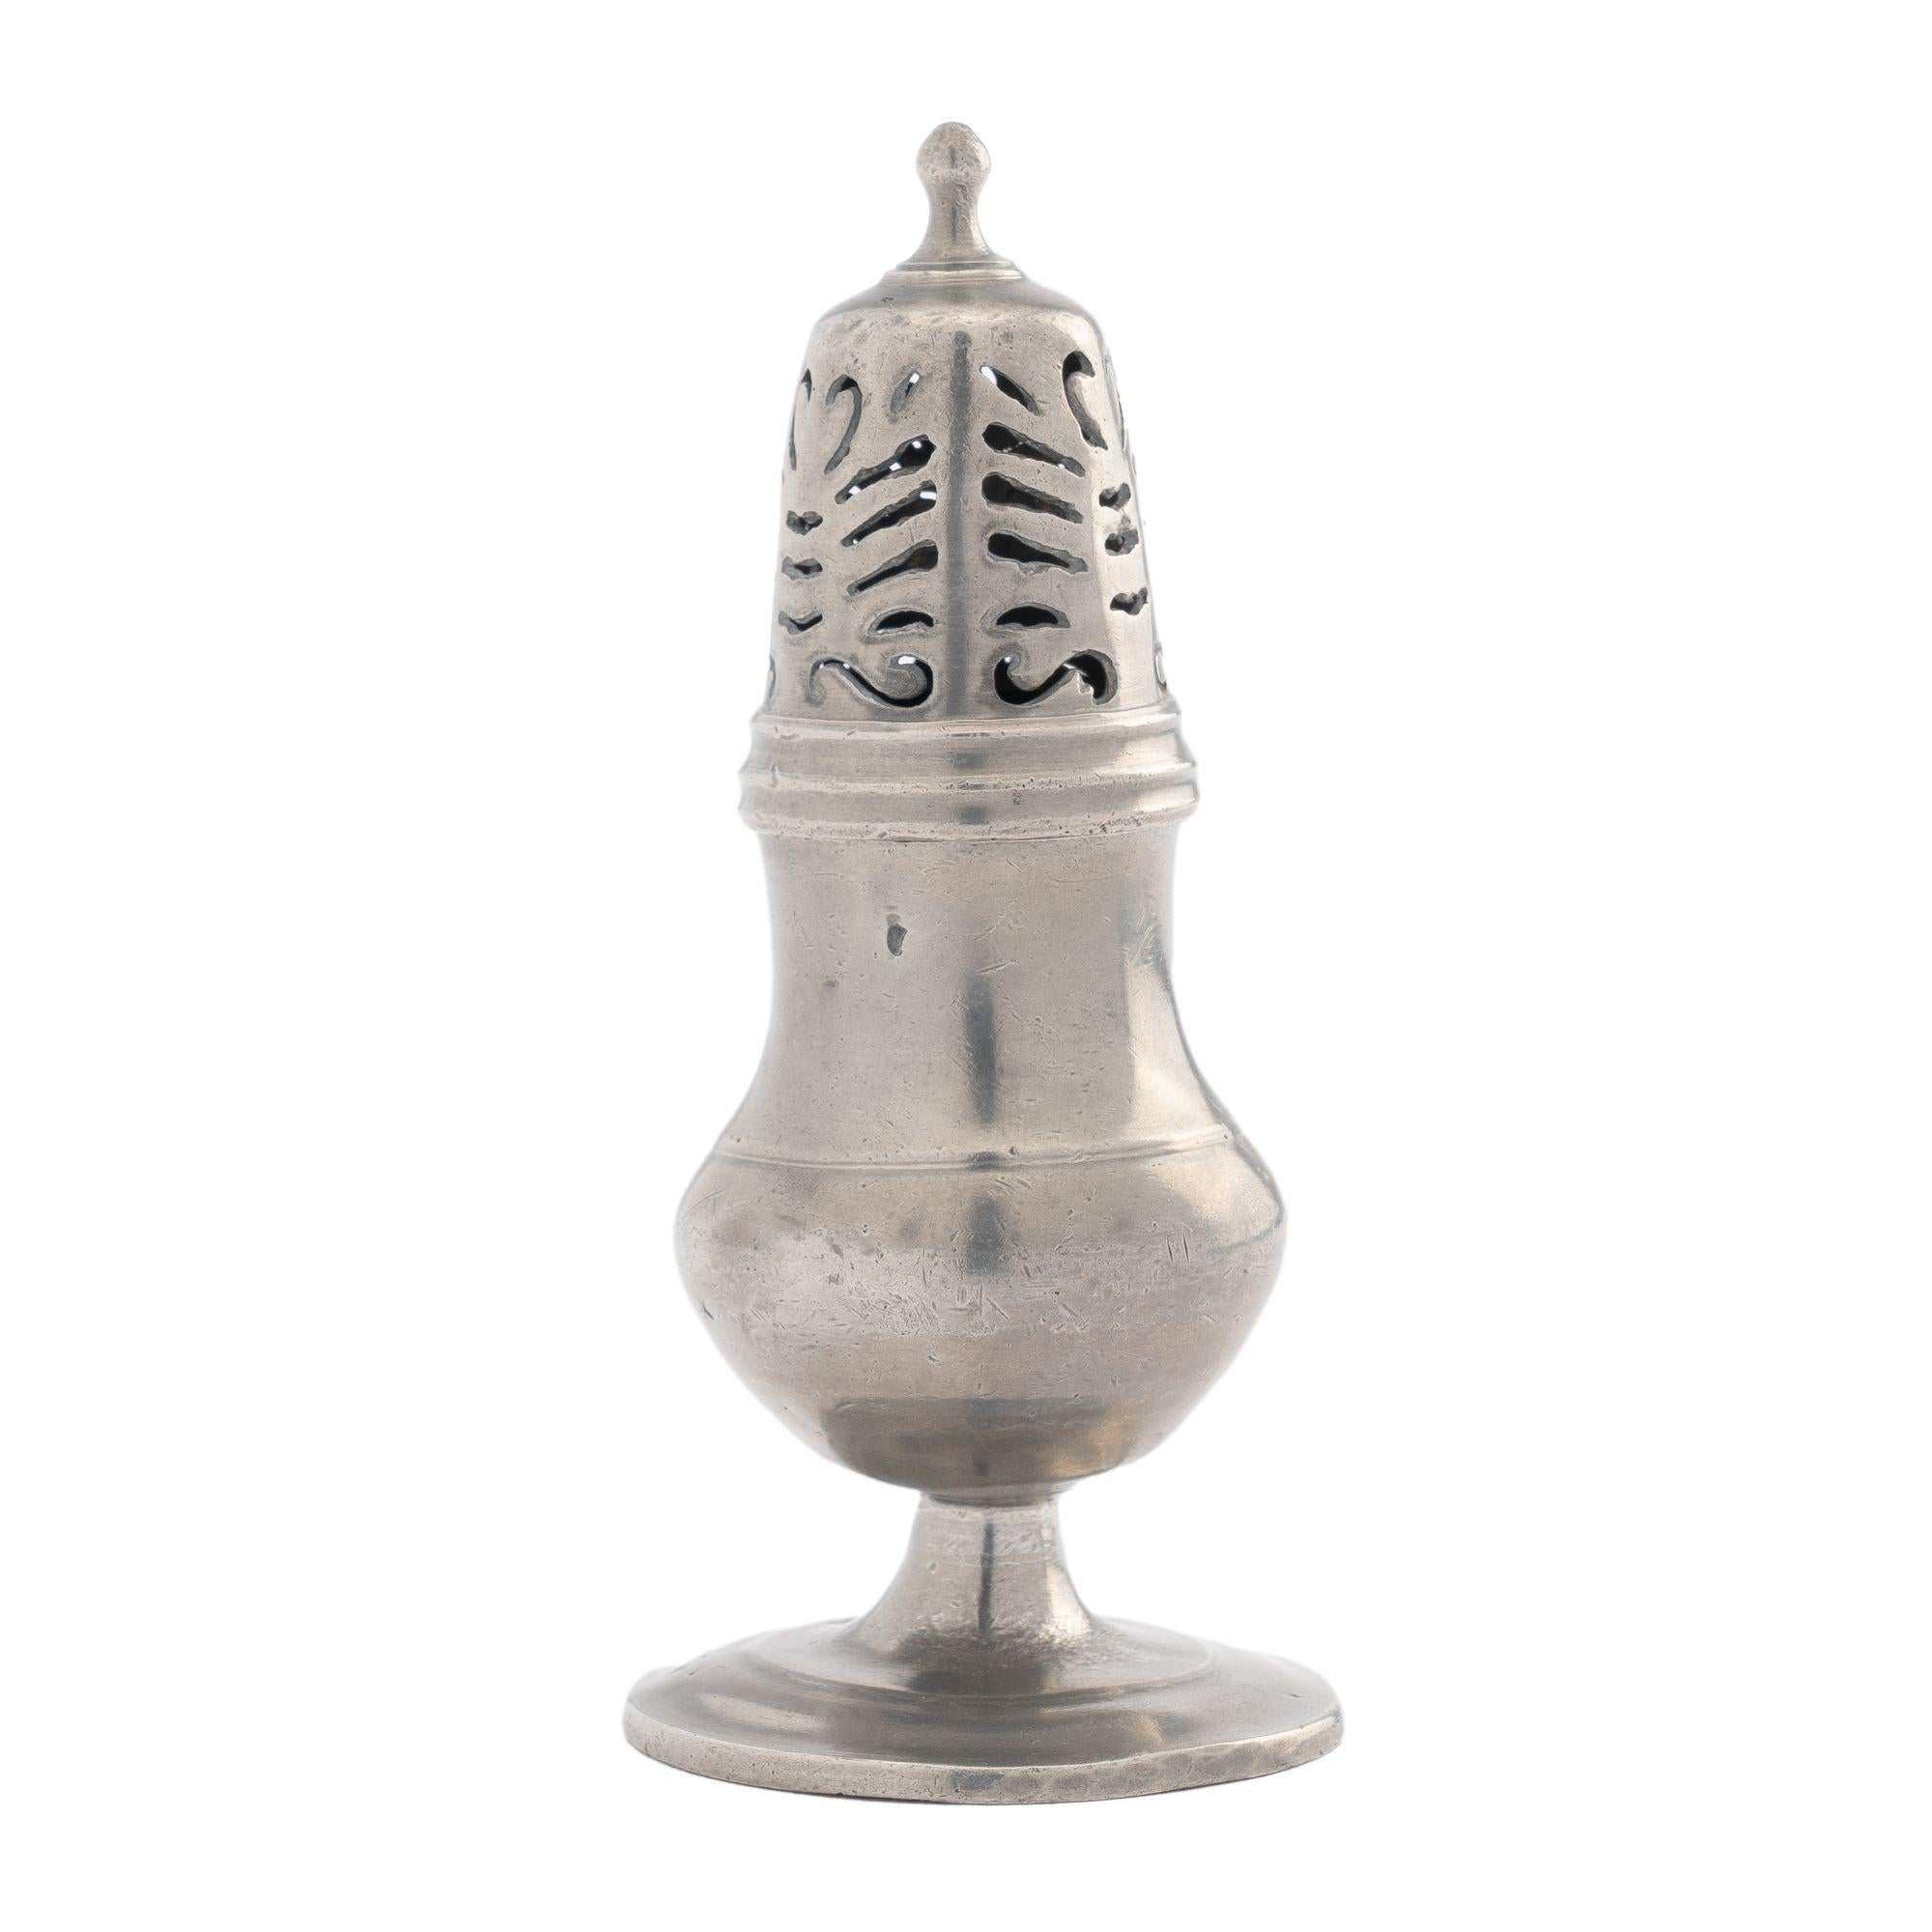 Pewter sugar castor with a Neoclassic anthemion pierced lid, threaded to a pyriform vessel on circular foot.
Austria, circa 1830.